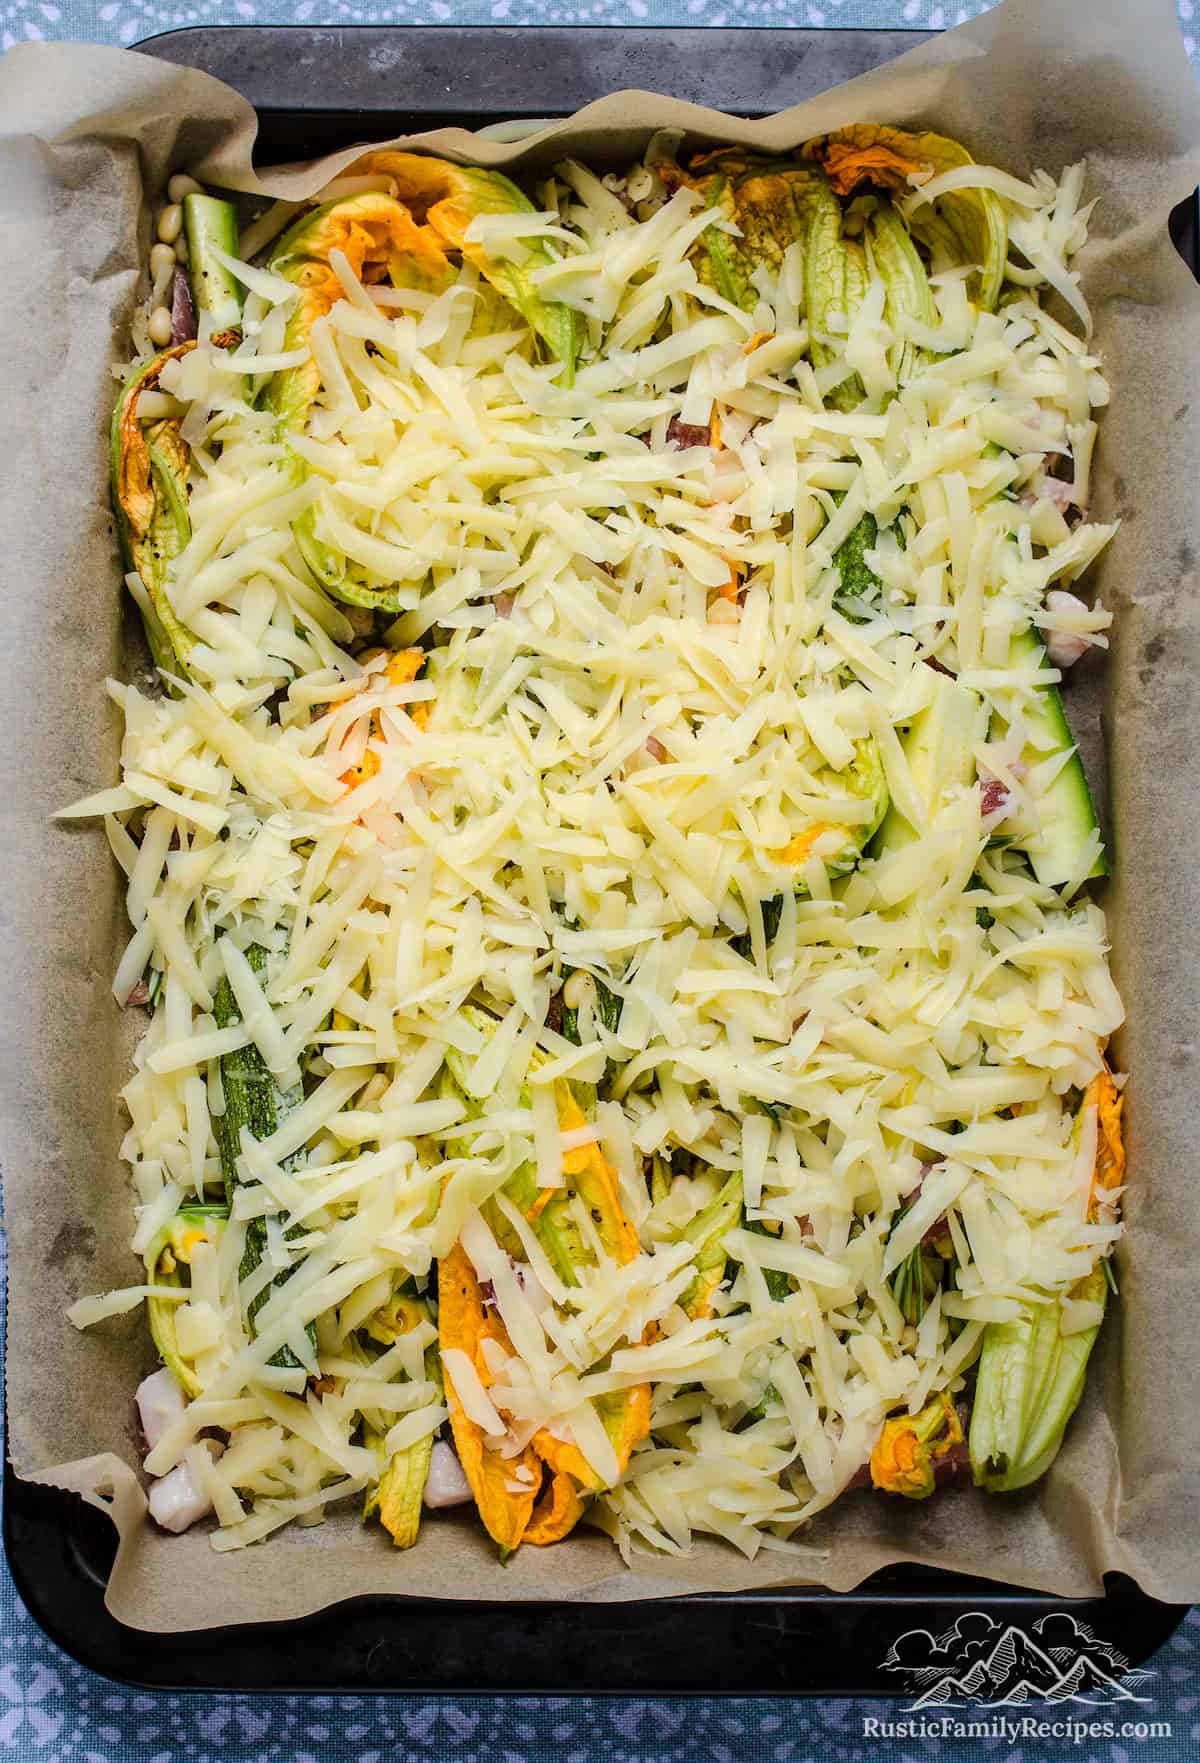 The topping ingredients for zucchini tart in a large rectangular parchment-lined baking pan, topped with a layer of shredded cheese.